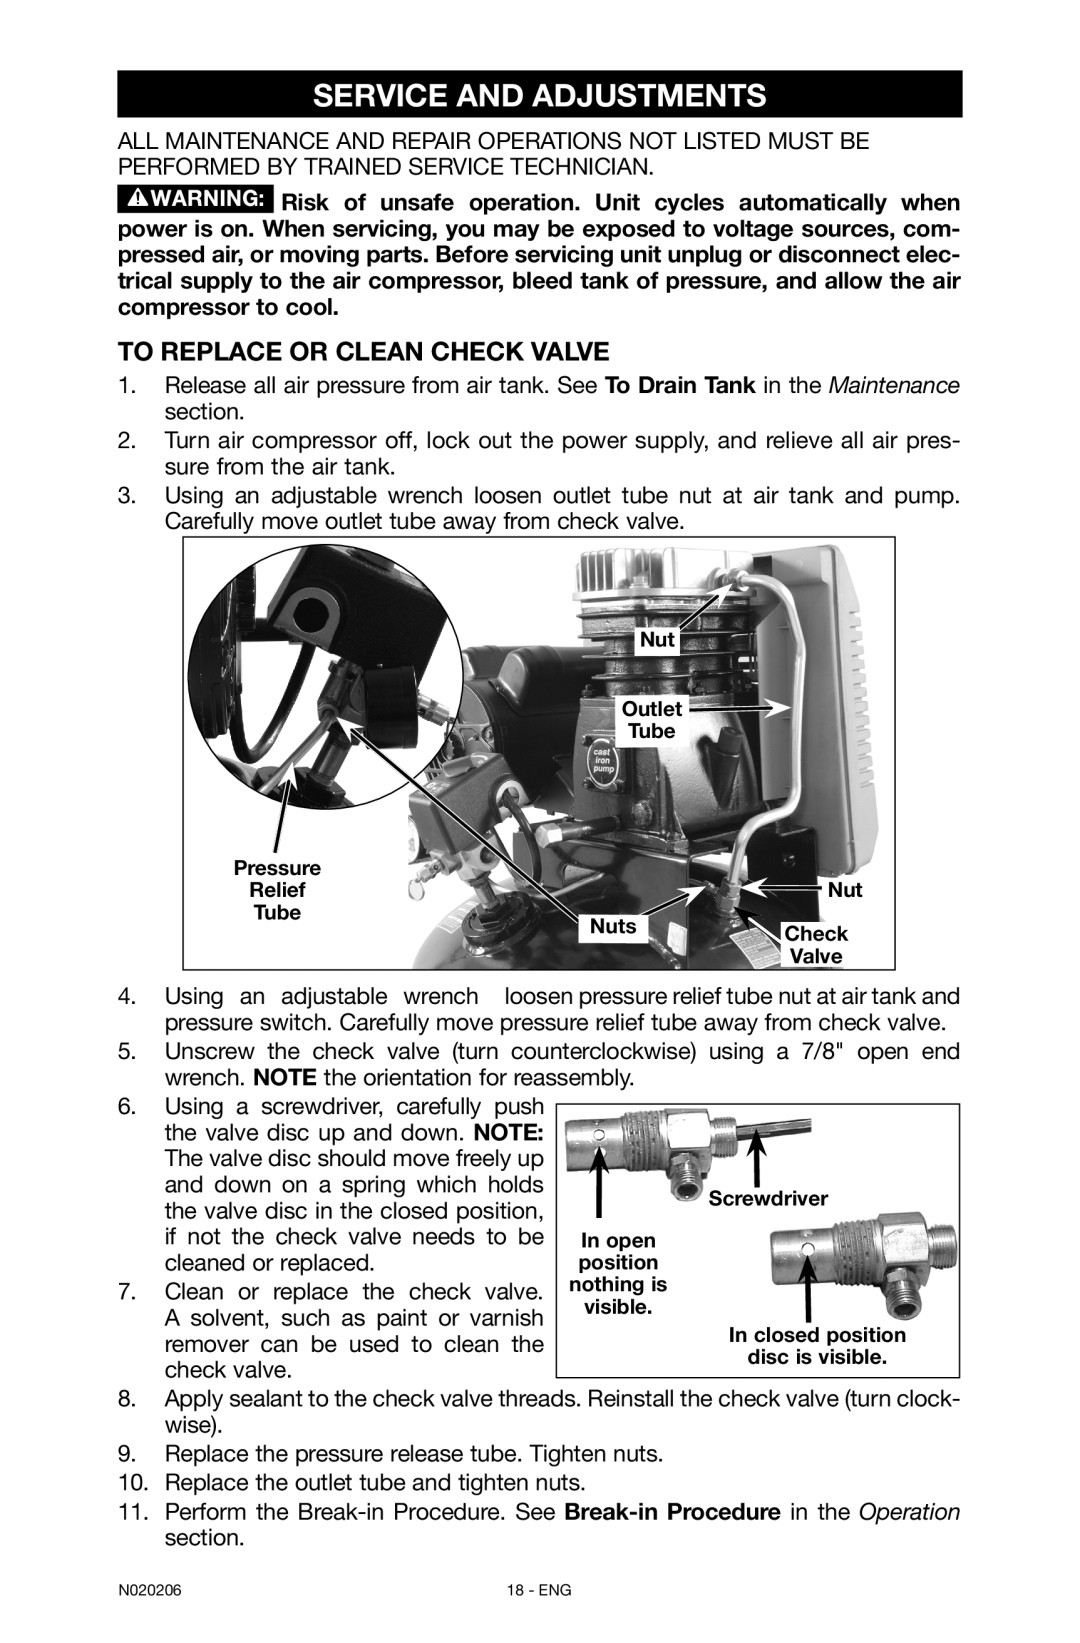 Porter-Cable N020206-NOV08-0, C7501M instruction manual Service And Adjustments, To Replace or Clean Check Valve 